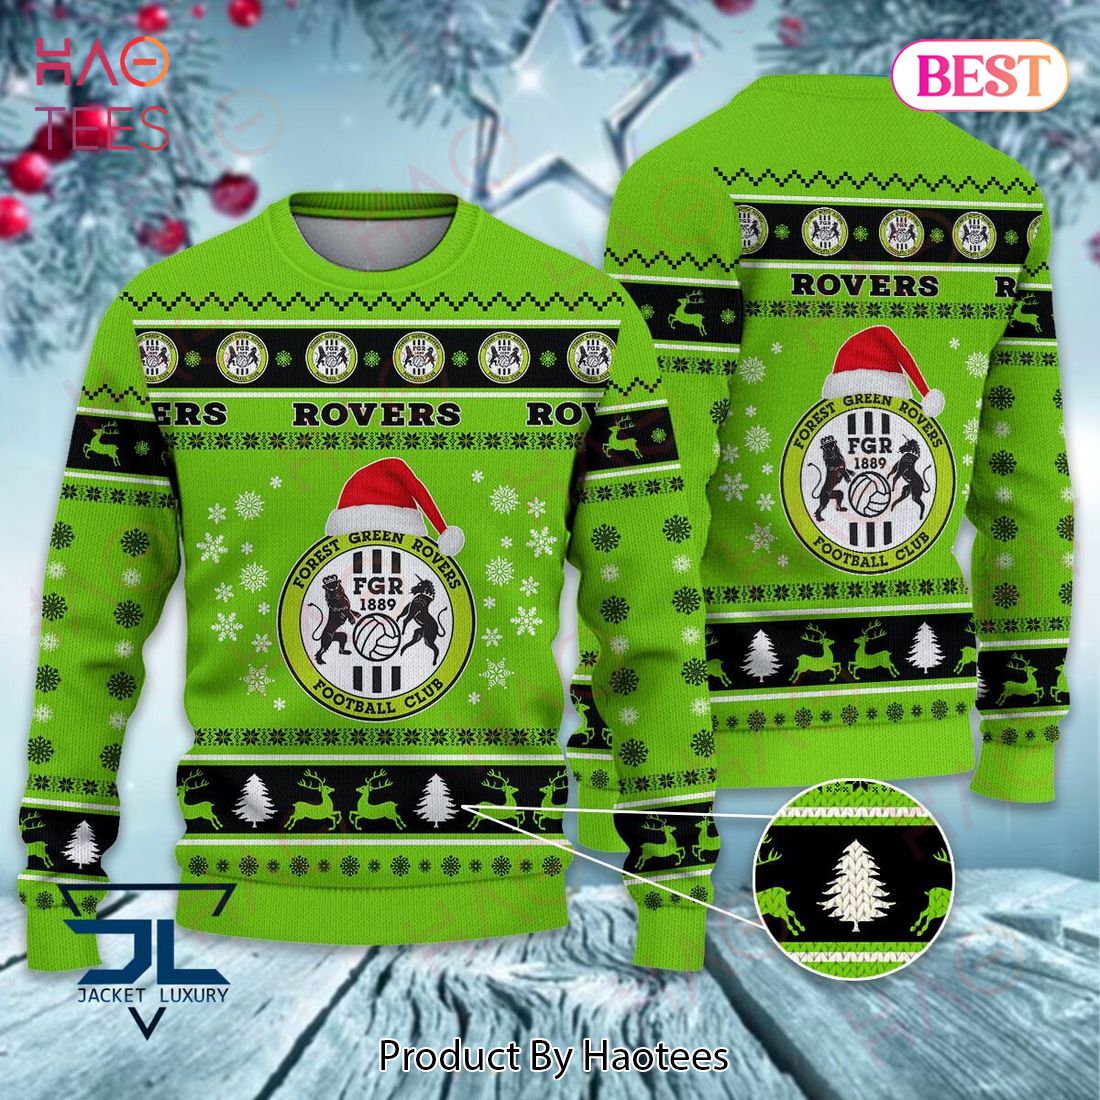 BEST Forest Green Rovers Luxury Brand Sweater Limited Edition